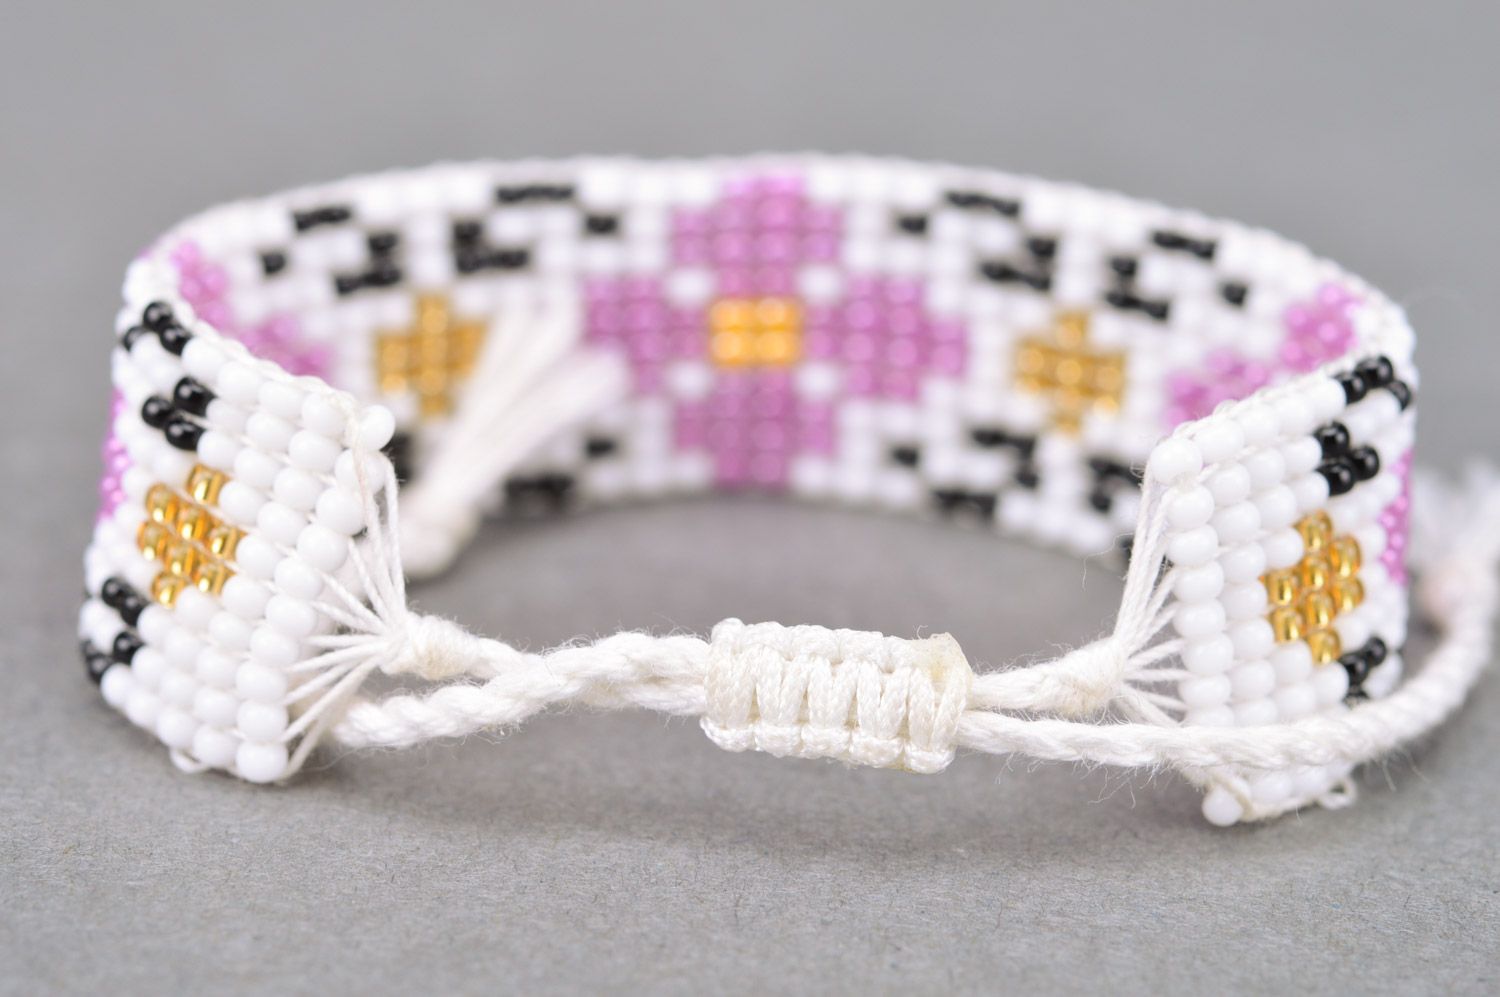 Handmade tender wrist bracelet woven of beads with floral ornament and ties photo 5